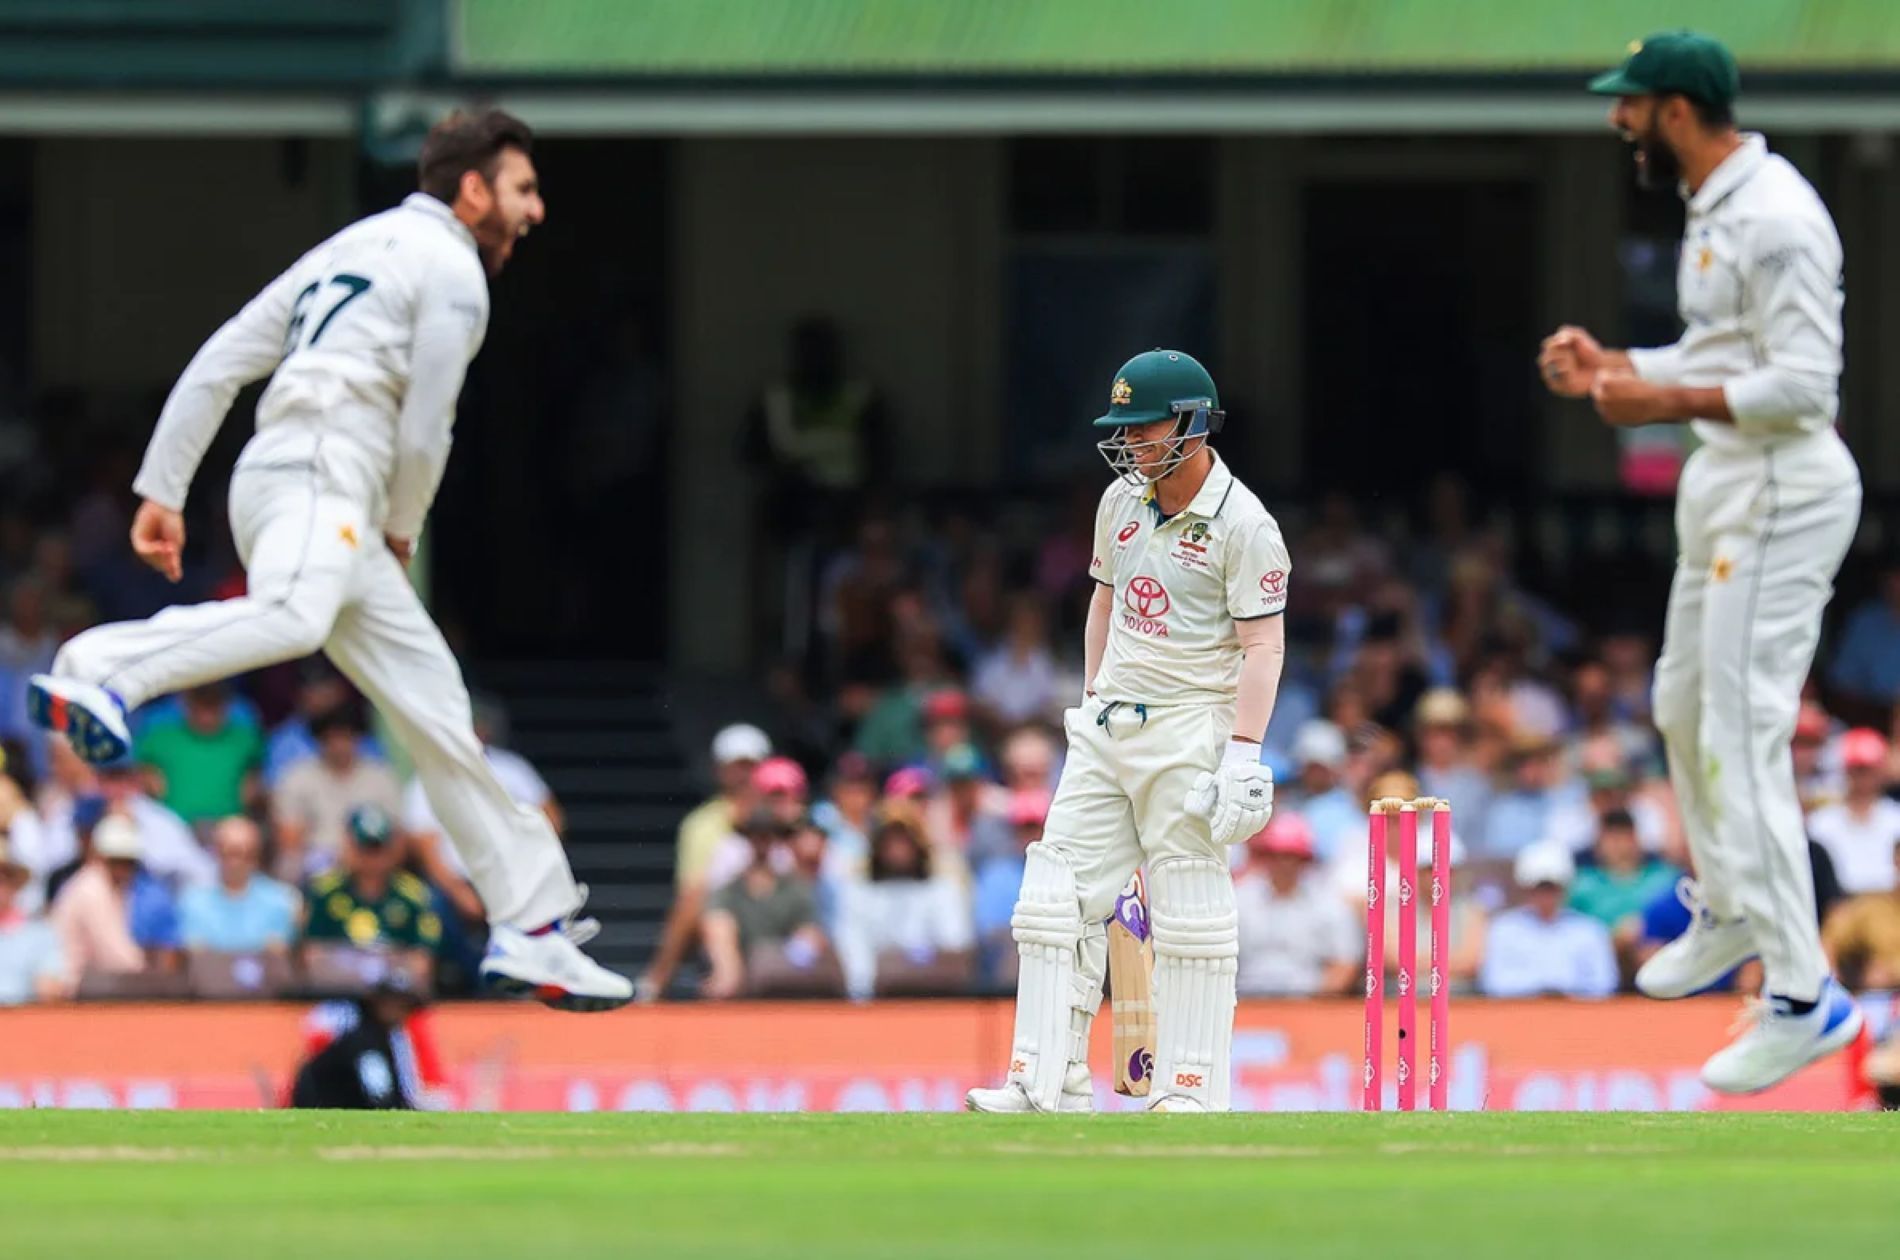 David Warner could not capitalize on an early reprieve on the opening day in Sydney.